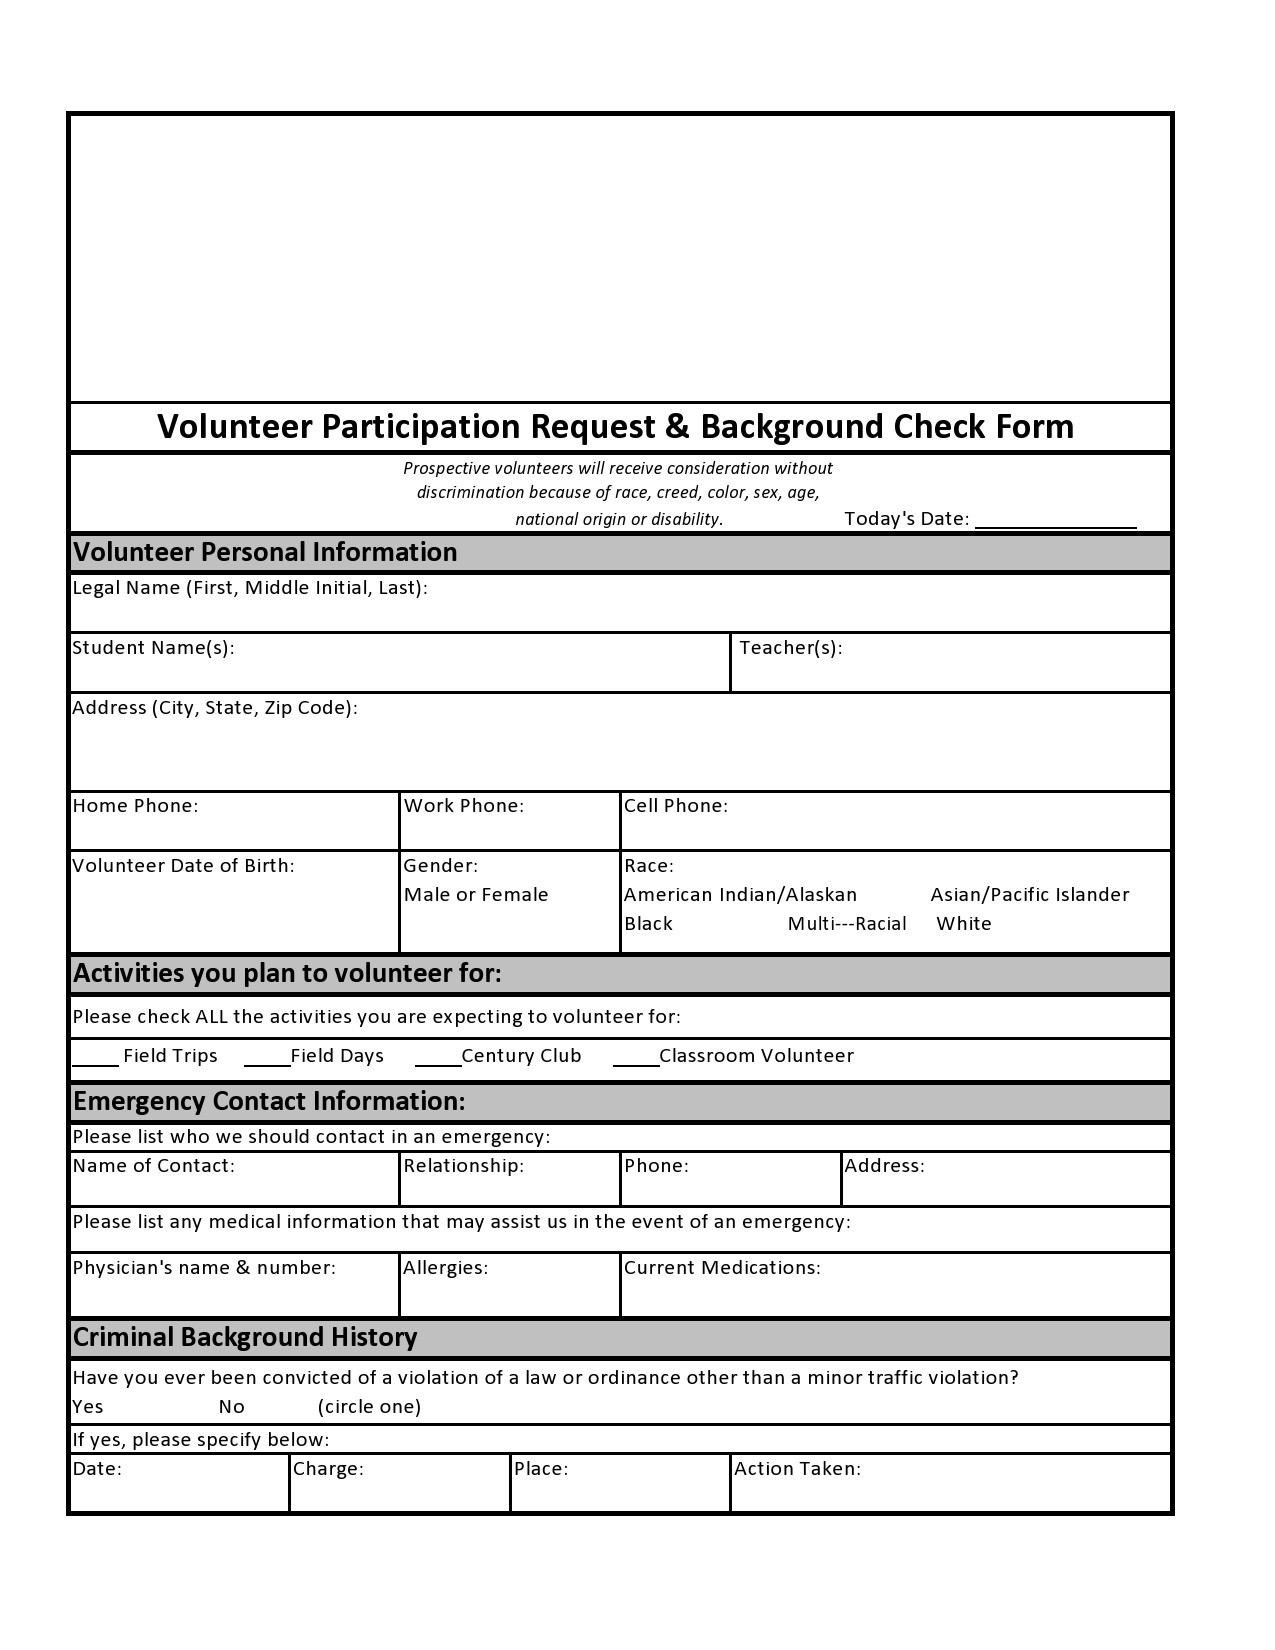 Free background check form 22